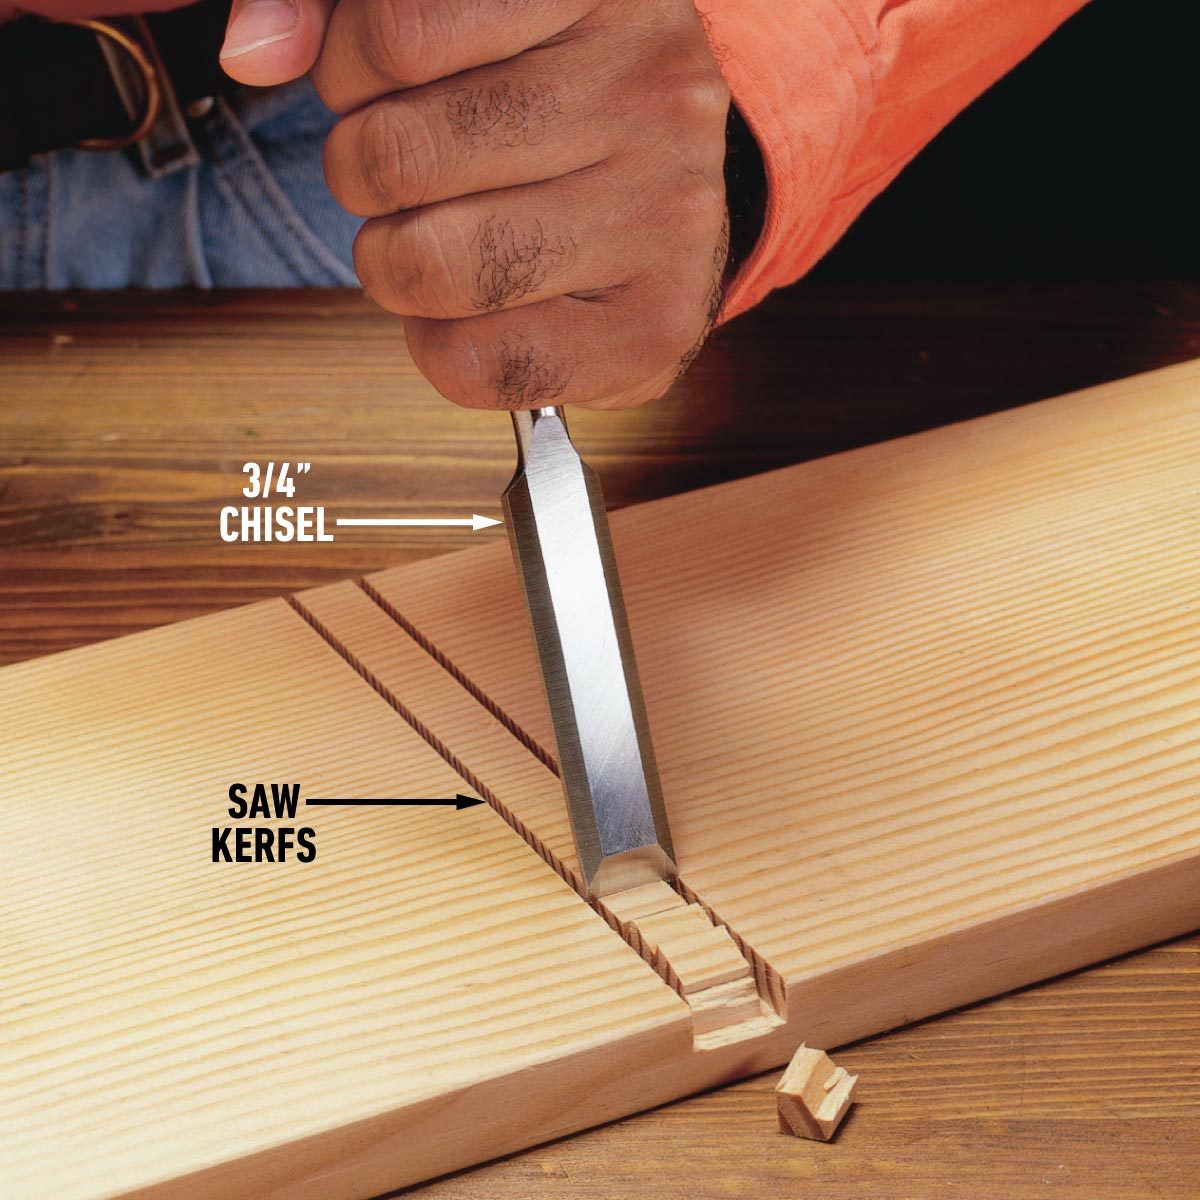 How To Use A Wood Chisel a dado